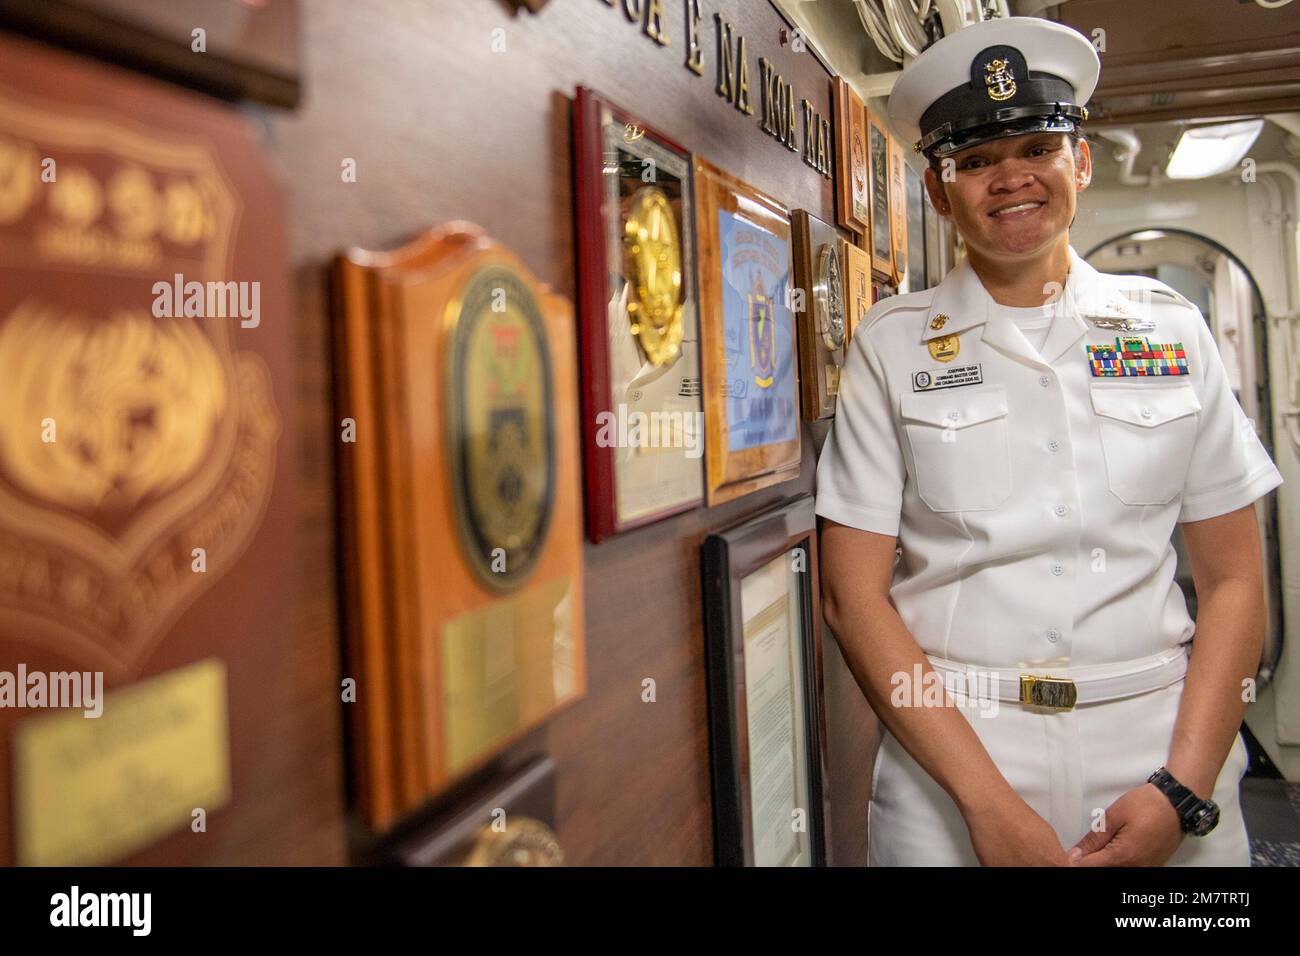 SAN DIEGO (May 13, 2022) – Command Master Chief of Arleigh Burke-class guided-missile destroyer USS Chung-Hoon (DDG 93) Josephine Tauoa, from American Samoa, poses for a photo to promote Asian American Pacific Islander Heritage Month. Chung-Hoon’s namesake, Gordon Chung-Hoon, was a Chinese-American Naval Academy graduate who was awarded the Navy Cross for his leadership as commanding officer of USS Sigsbee (DDG 502) during a World War II kamikaze attack in 1945. Stock Photo